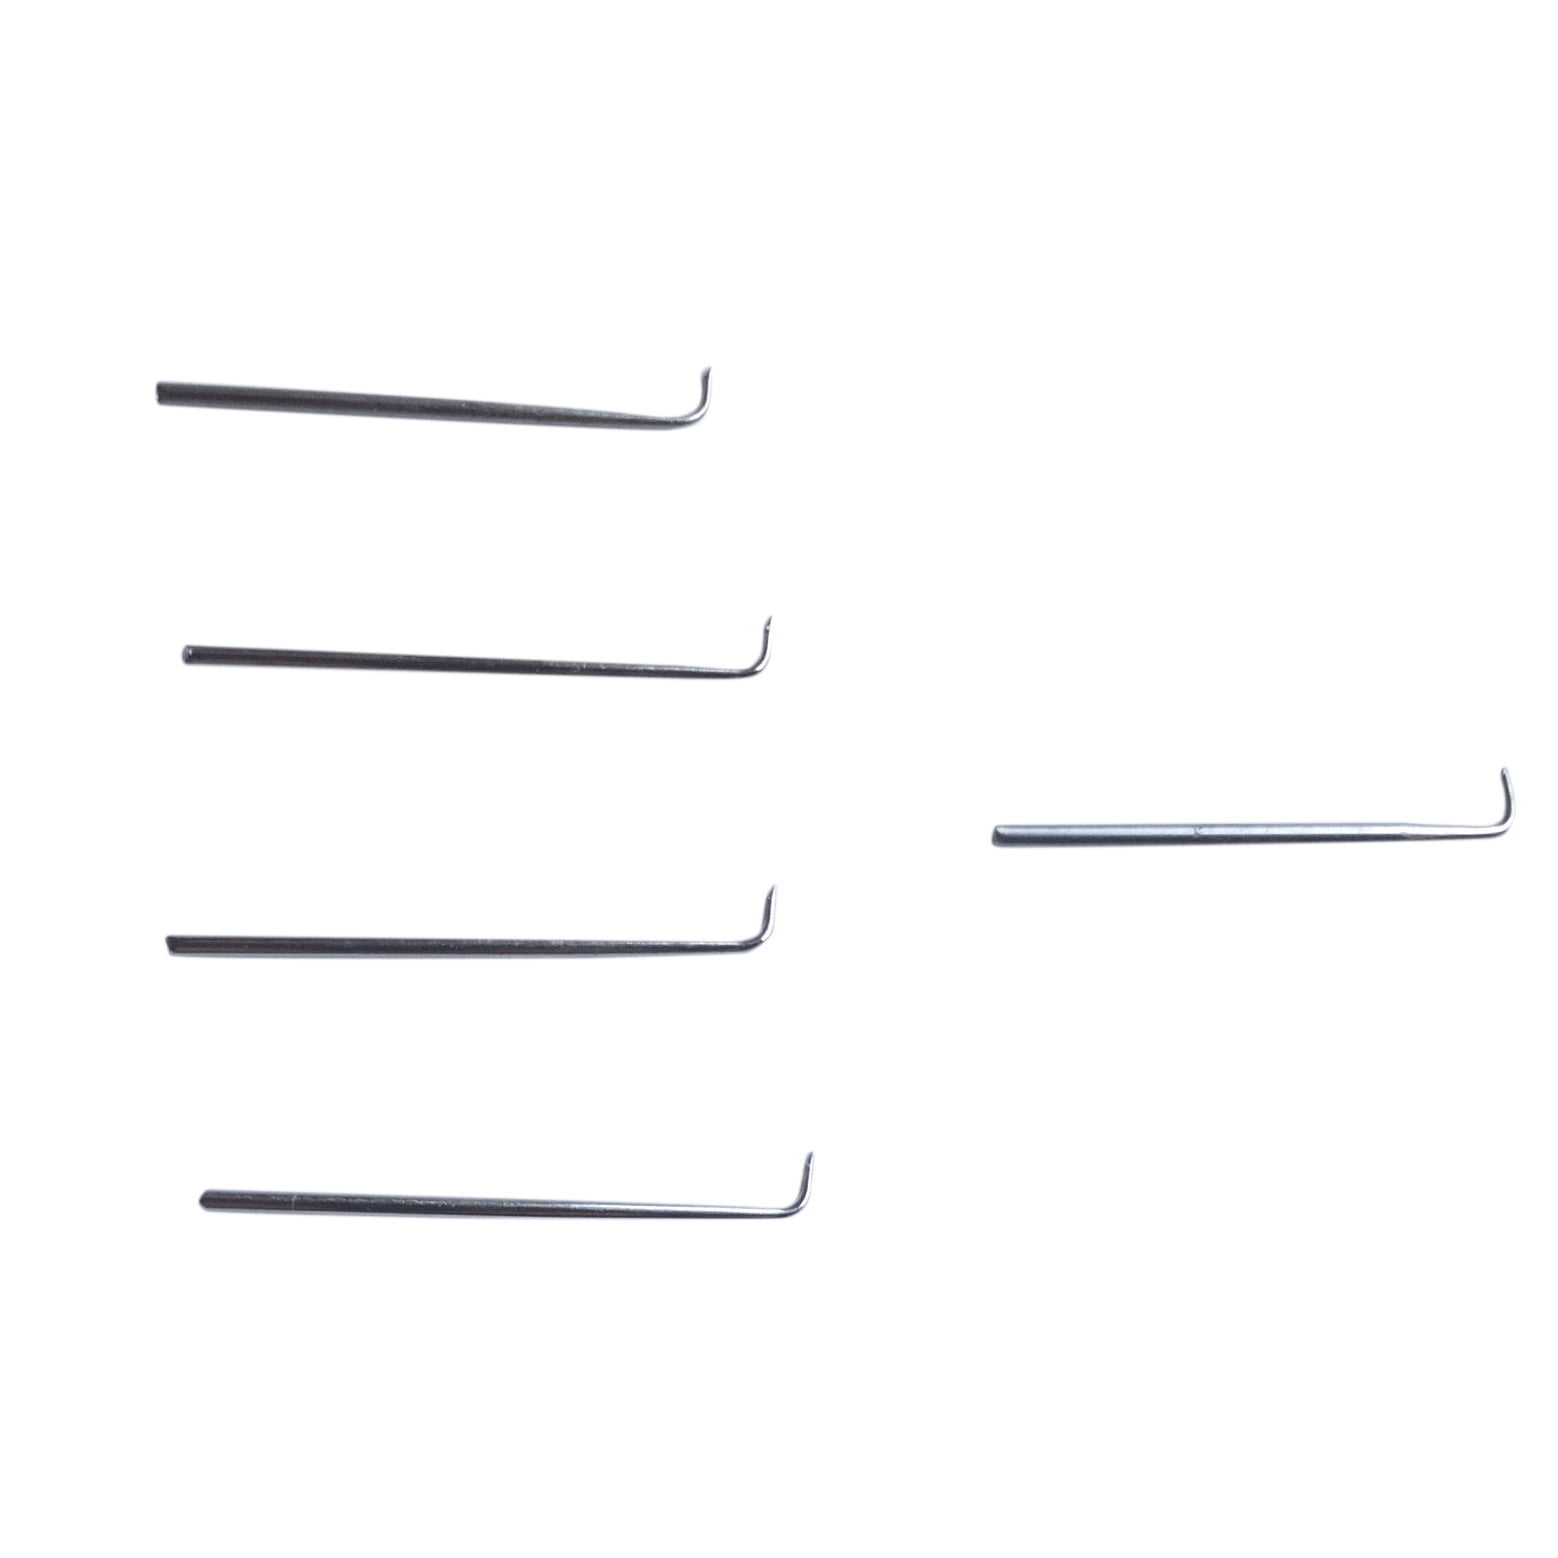 5pcs Wig Hair Extension Hook Ventilating Needle For Wig Making Crochet Hook  Tools Repair Lace Wigs